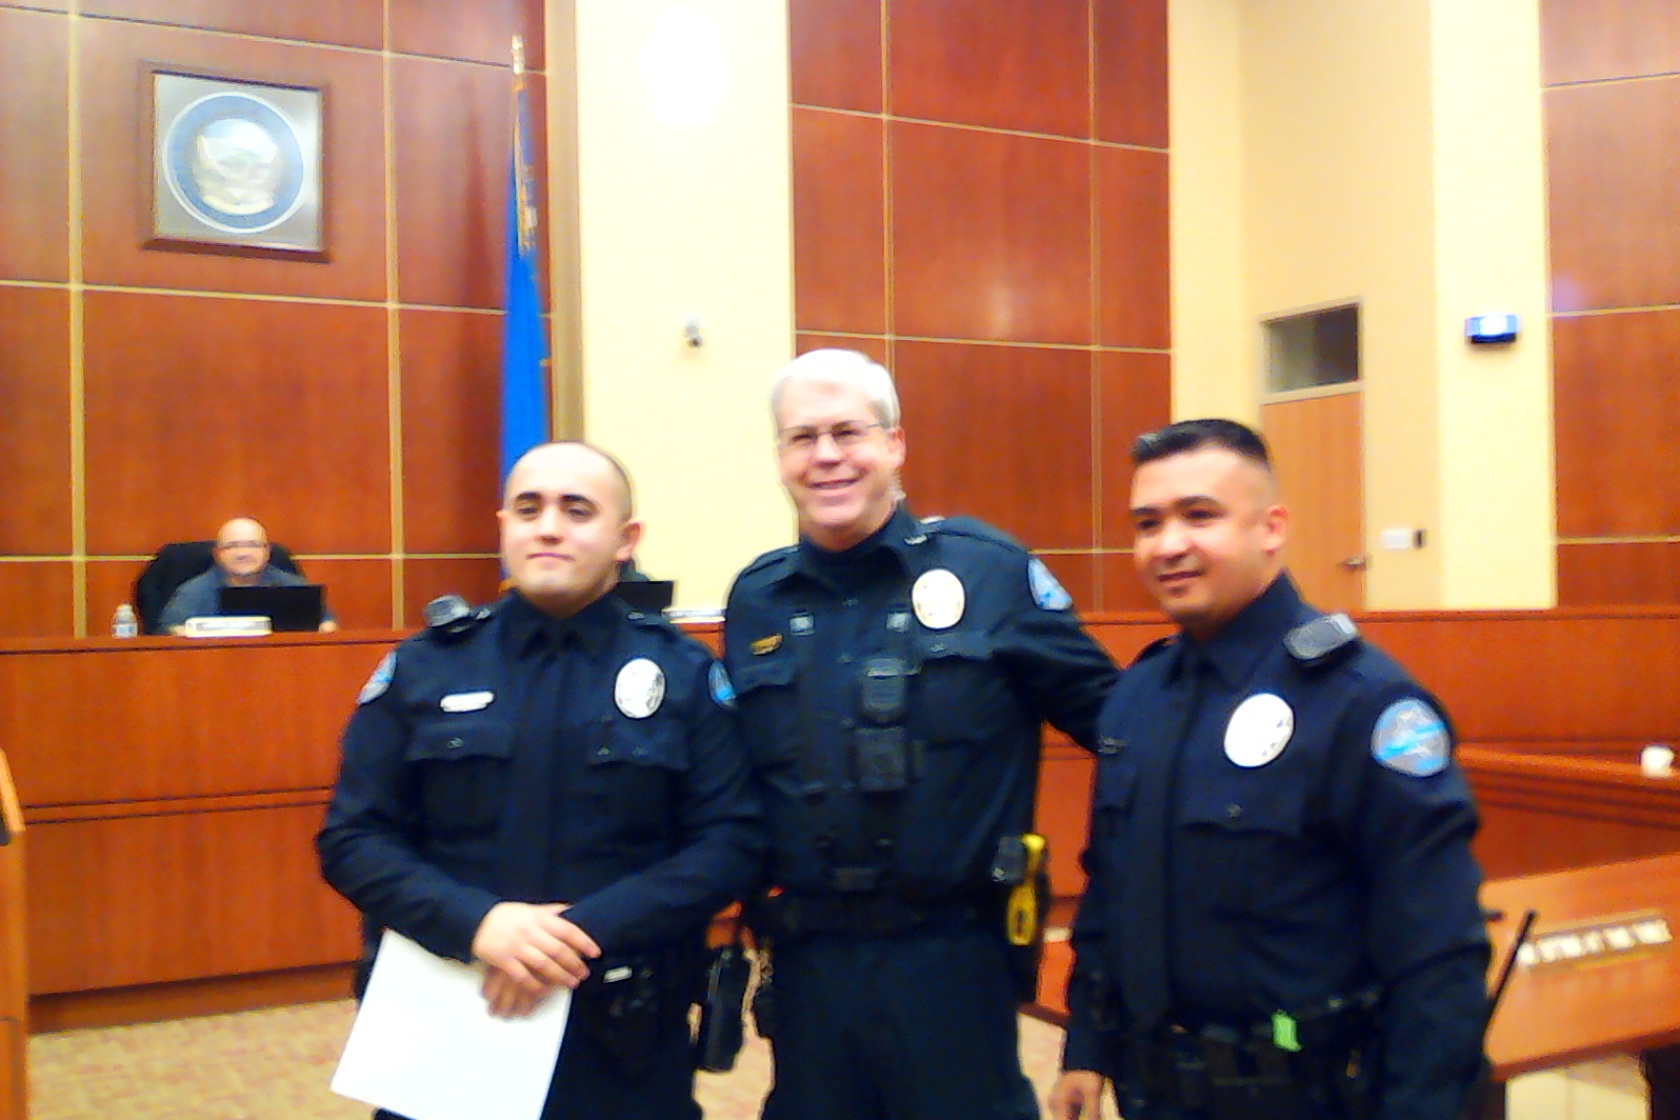  Police Officer Pete Turner receives a recognition plaque for 10 Years of Service from Police Chief Burdel Welsh. Right photo: Fernando Uribe, Police Chief Welsh, and Miguel Pantelakis(Photo High Desert Advocate).